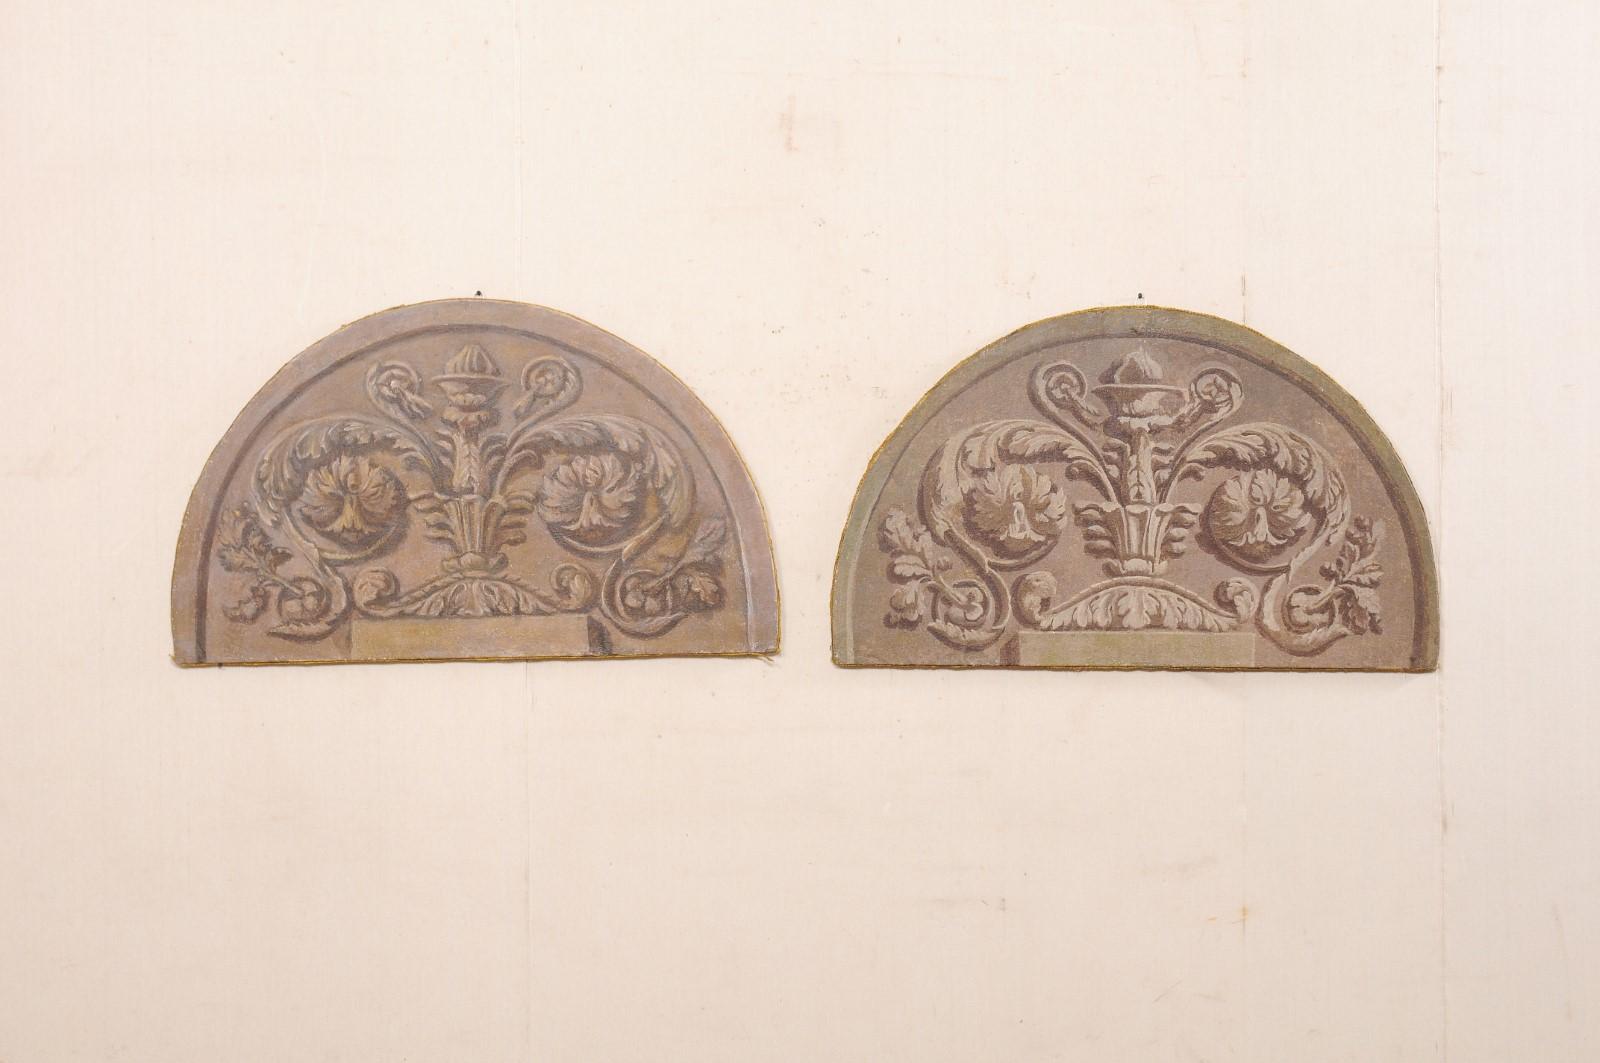 An Italian pair of stretched canvas paintings from the 19th century. These antique wall decorations from Italy each have painted canvas stretched over an arch-shaped wood frame, nearly 4 feet in width. The paintings are Neoclassical in design